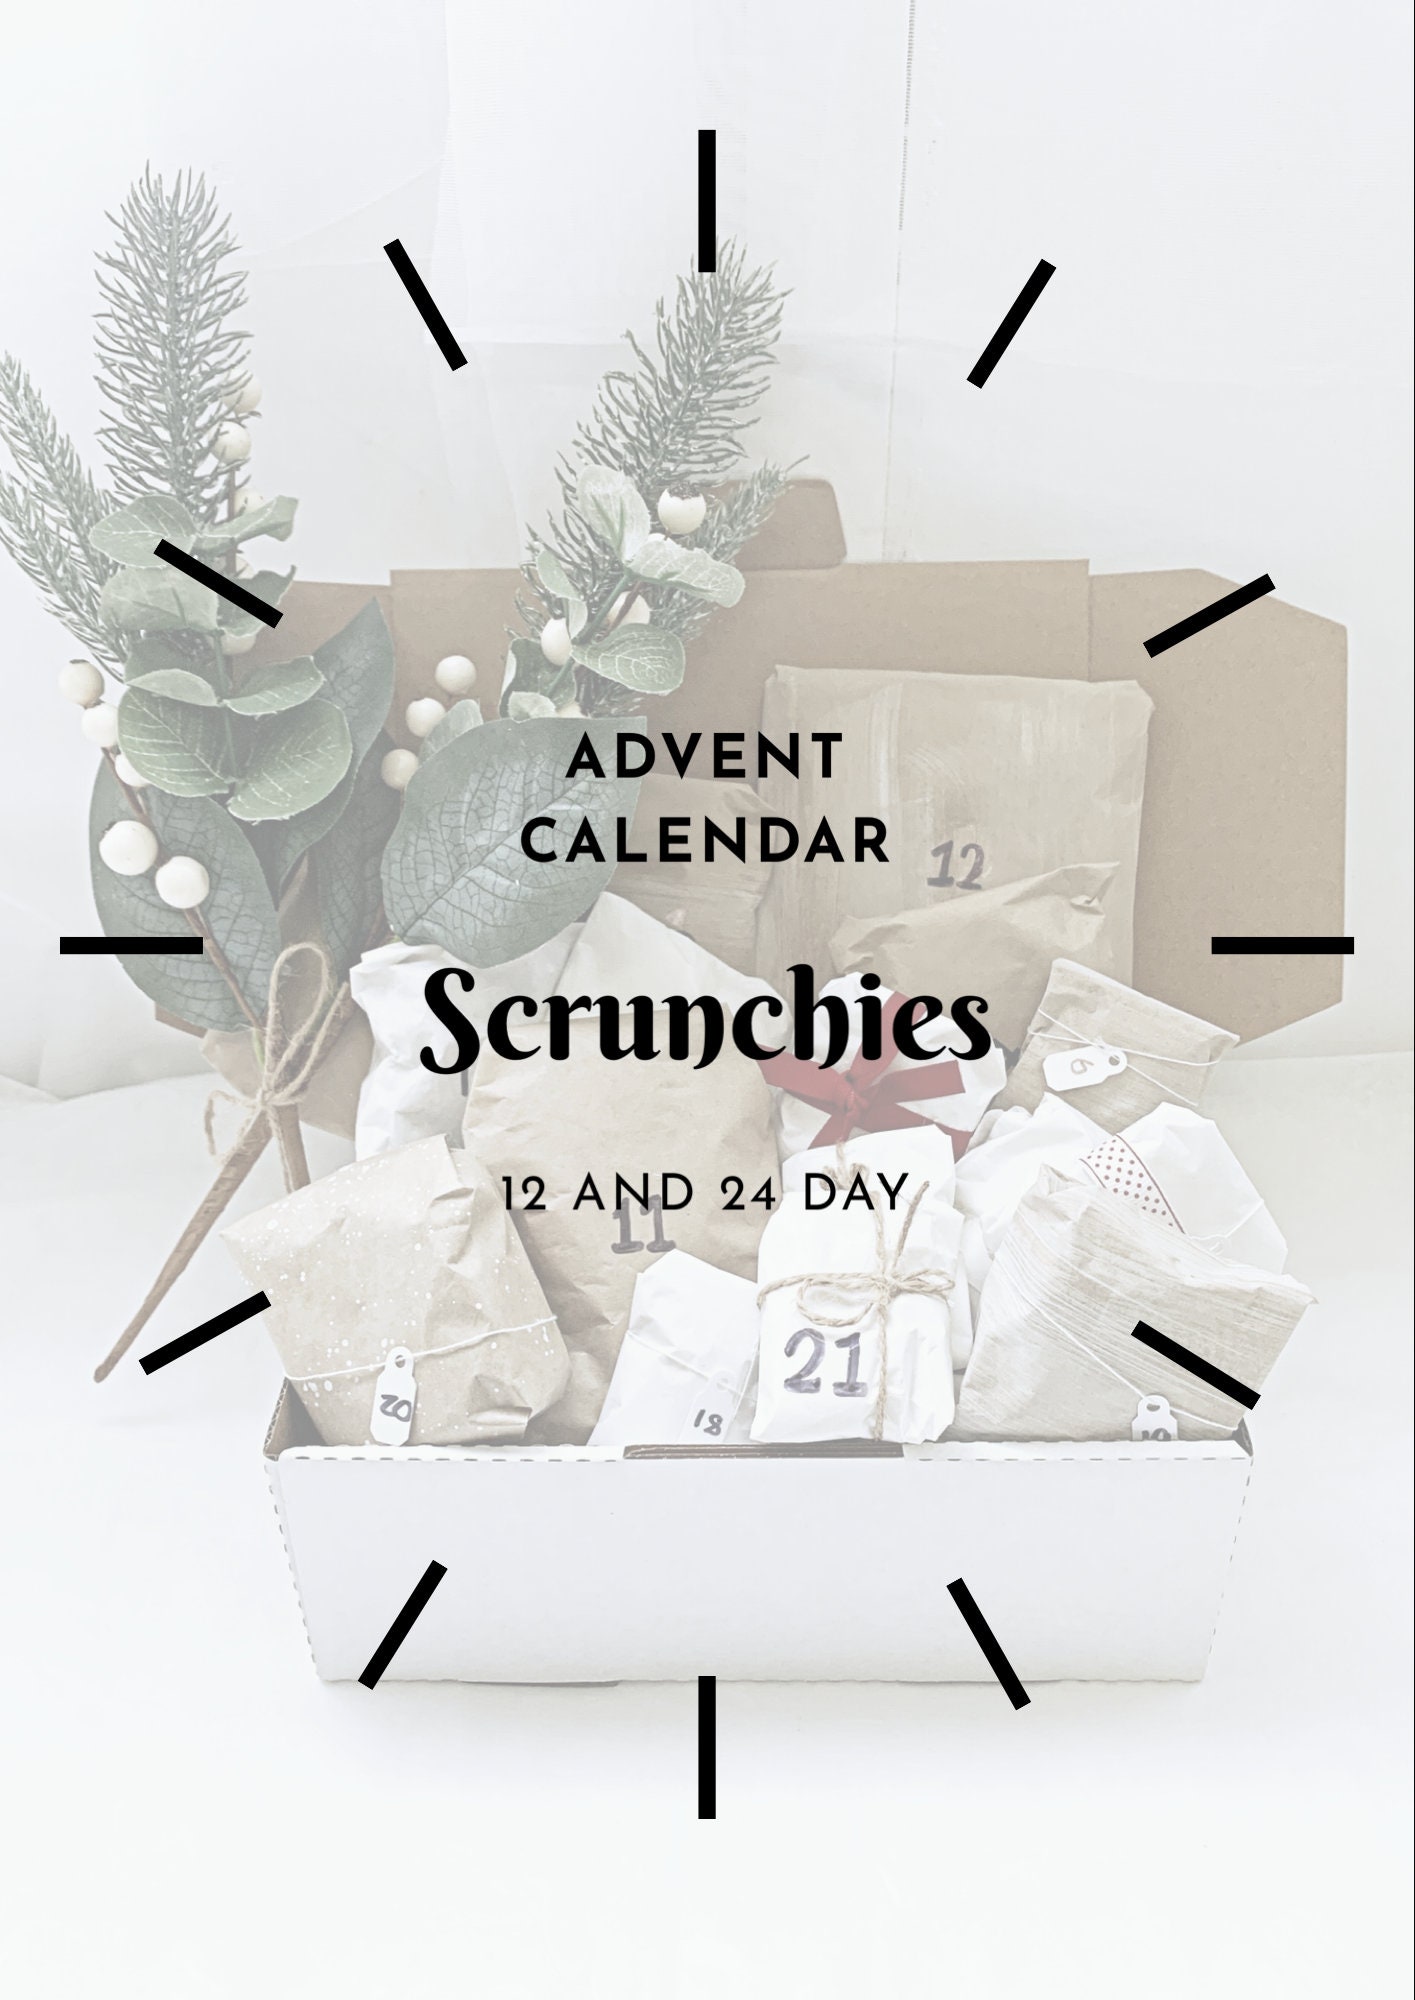 Advent Calendar Fillers, Gifts for Advent Calendars, Gifts Under 5